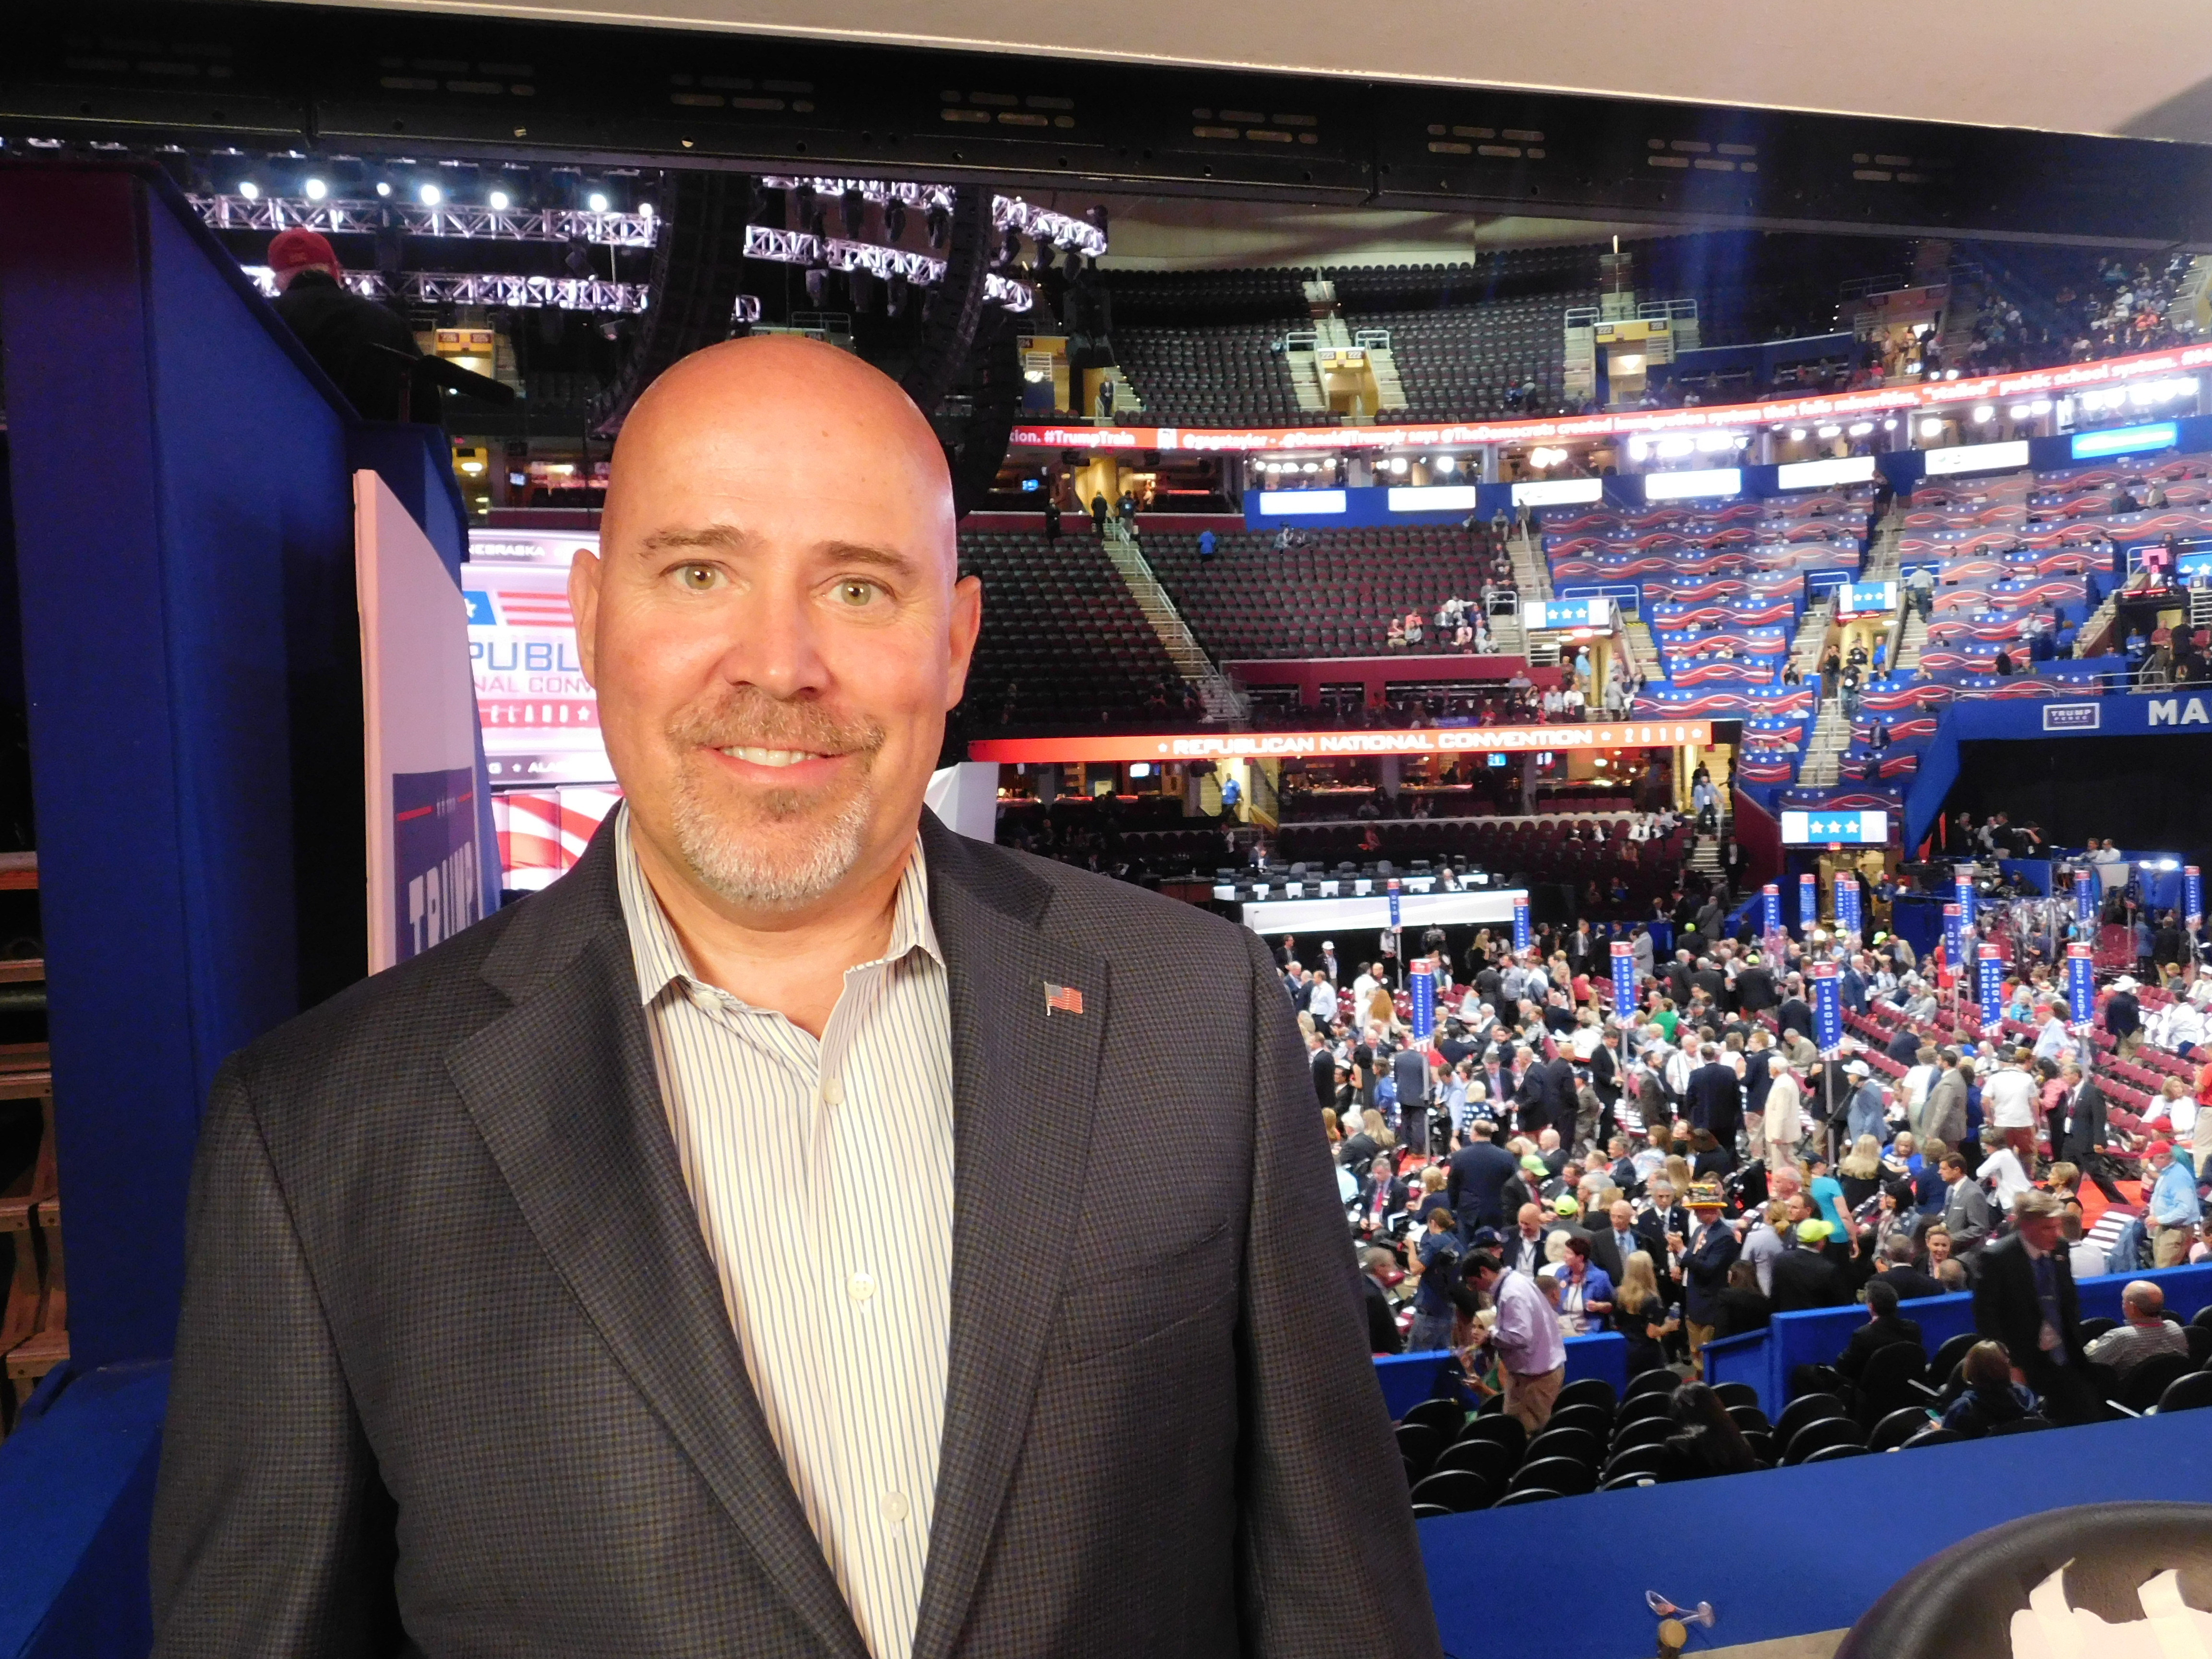 PolitickerNJ caught up with Congressman MacArthur at the 2016 RNC.